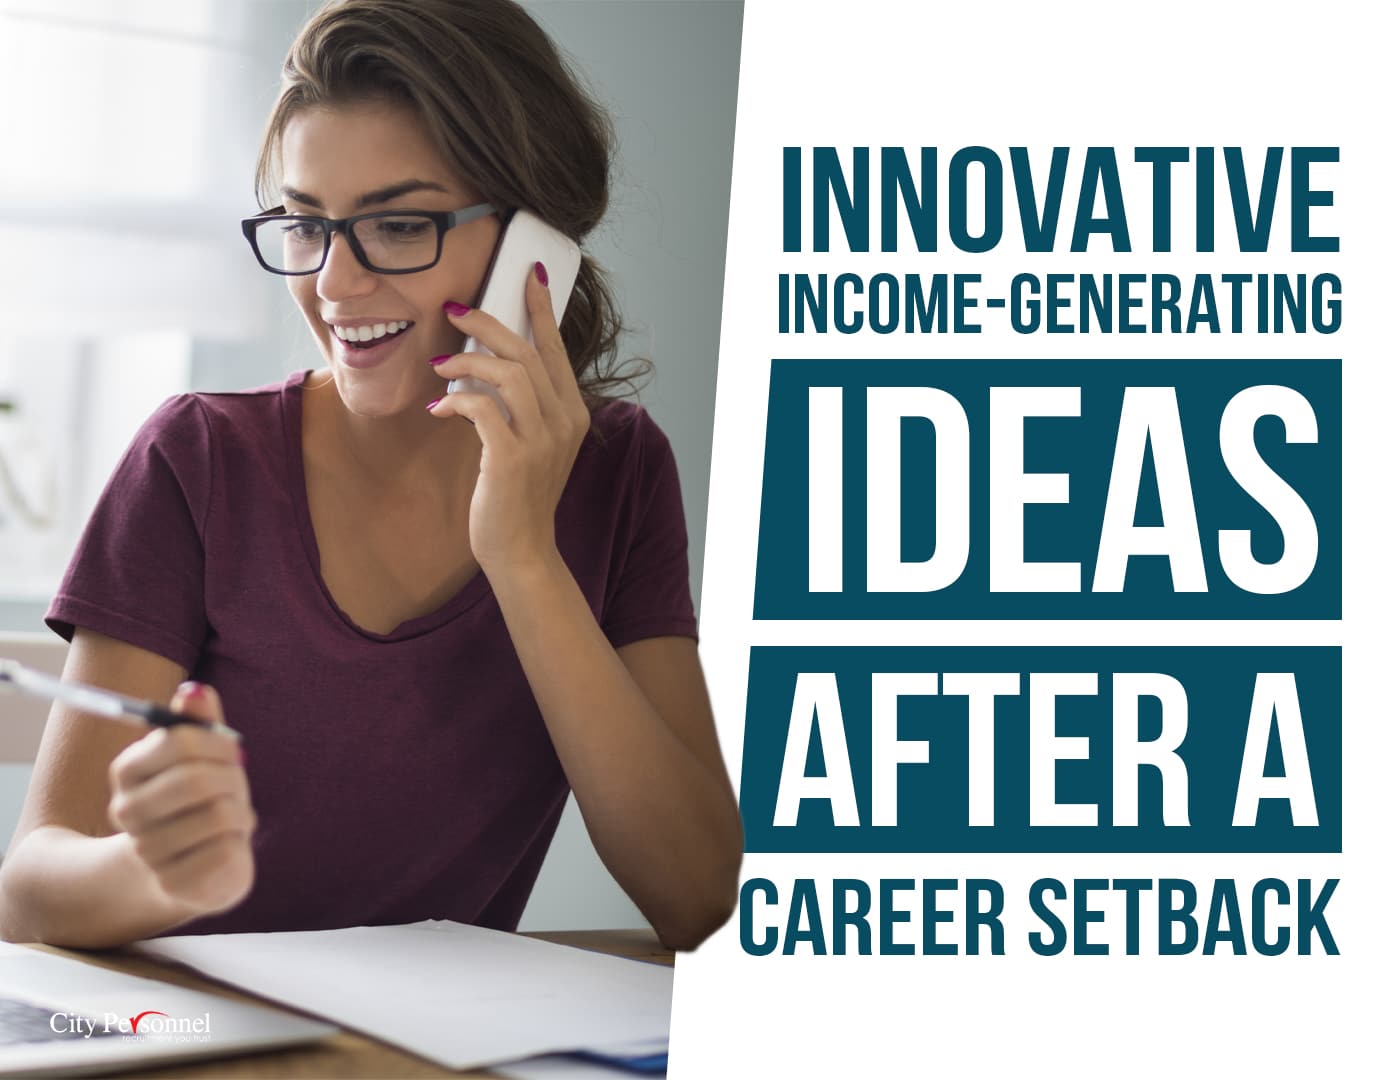 Income generating ideas after a career setback